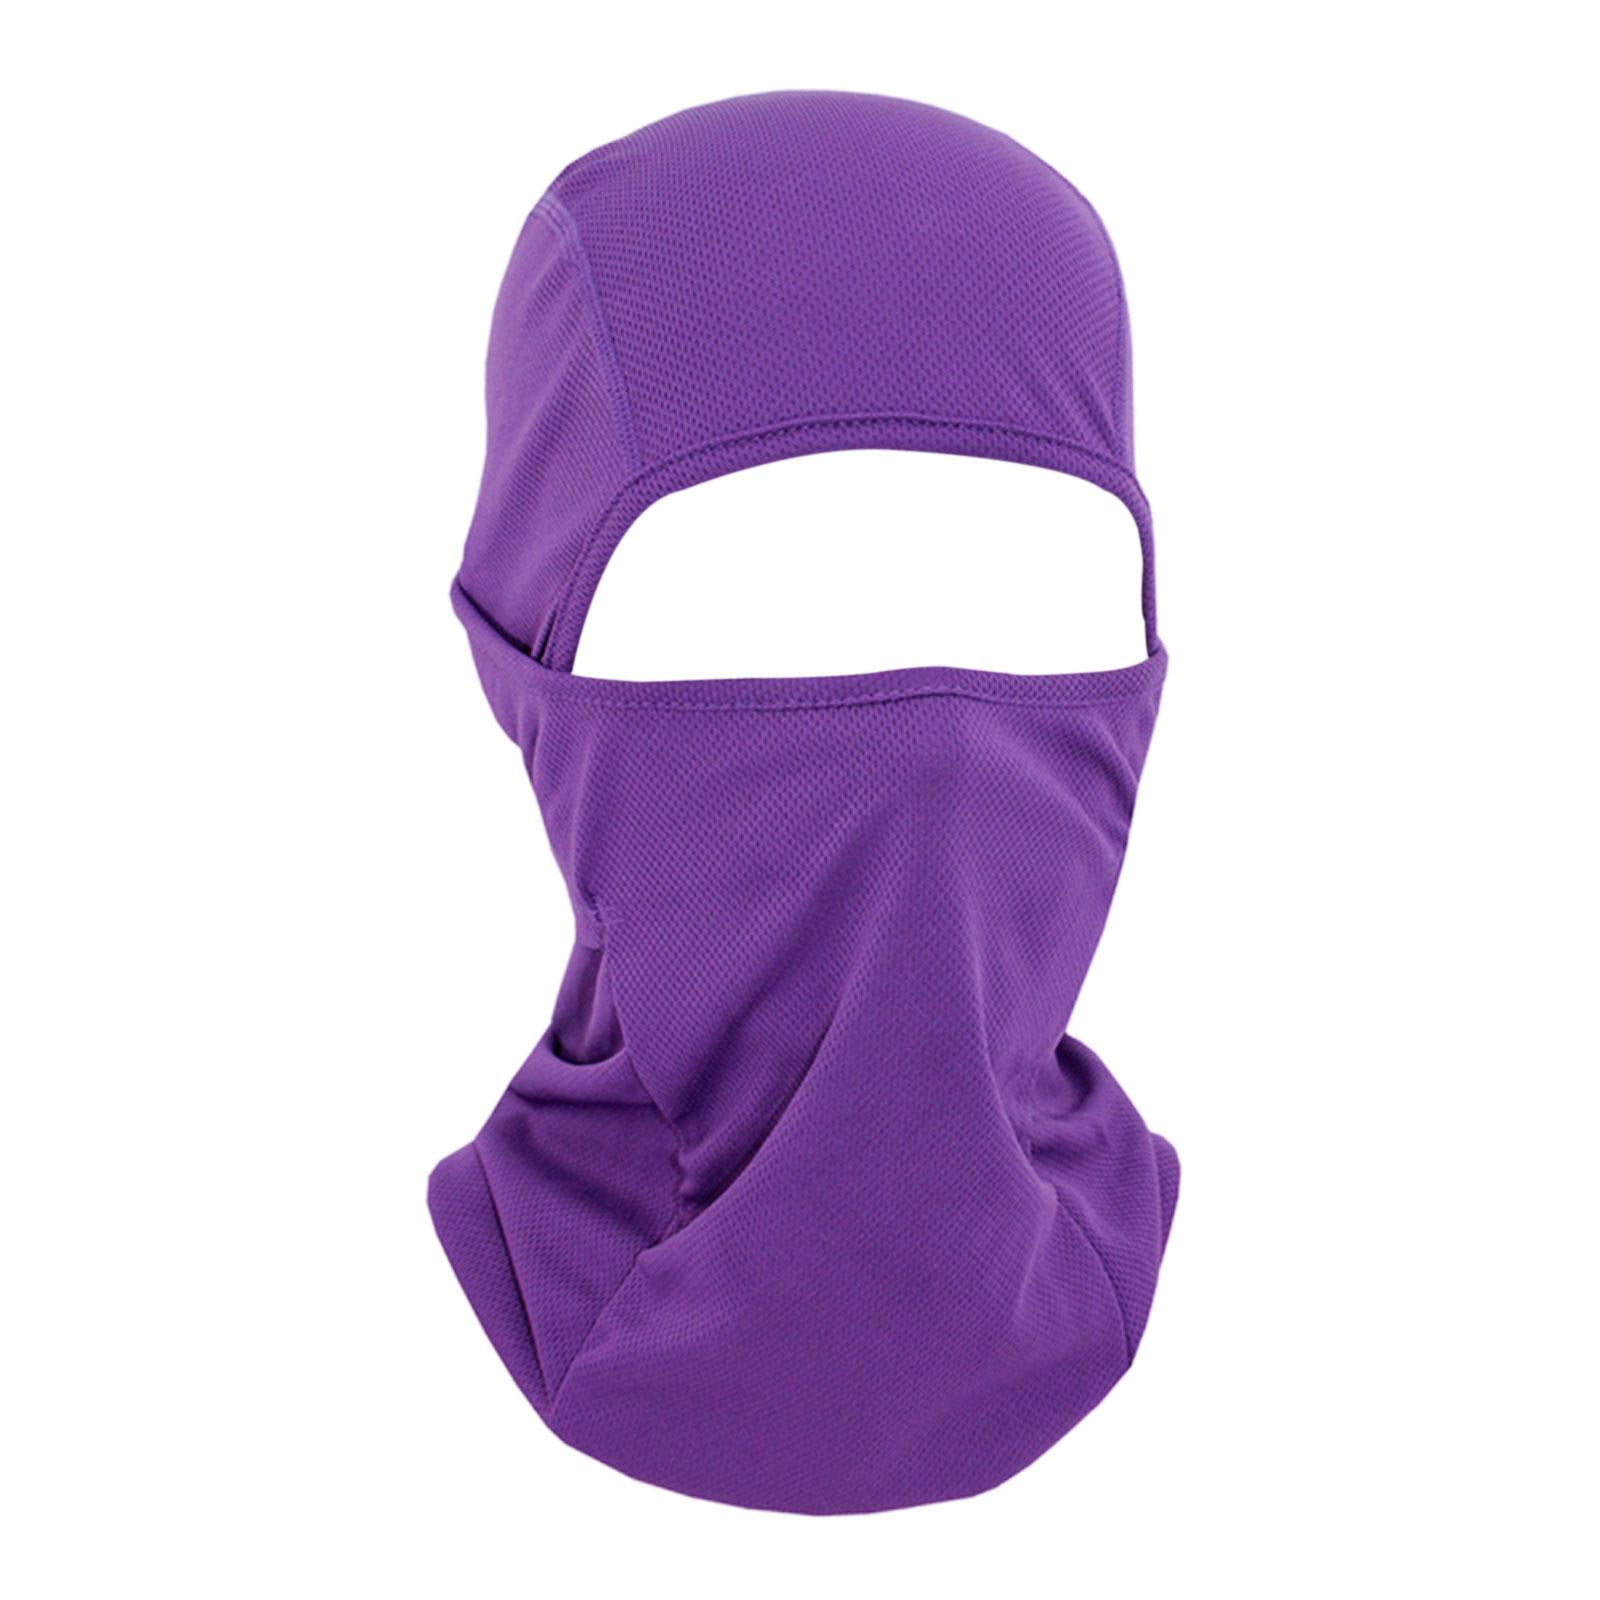 Unisex Outdoor Activities Balaclava Hats Face Mask Quick-Drying Breathable Riding Fishing Cap 